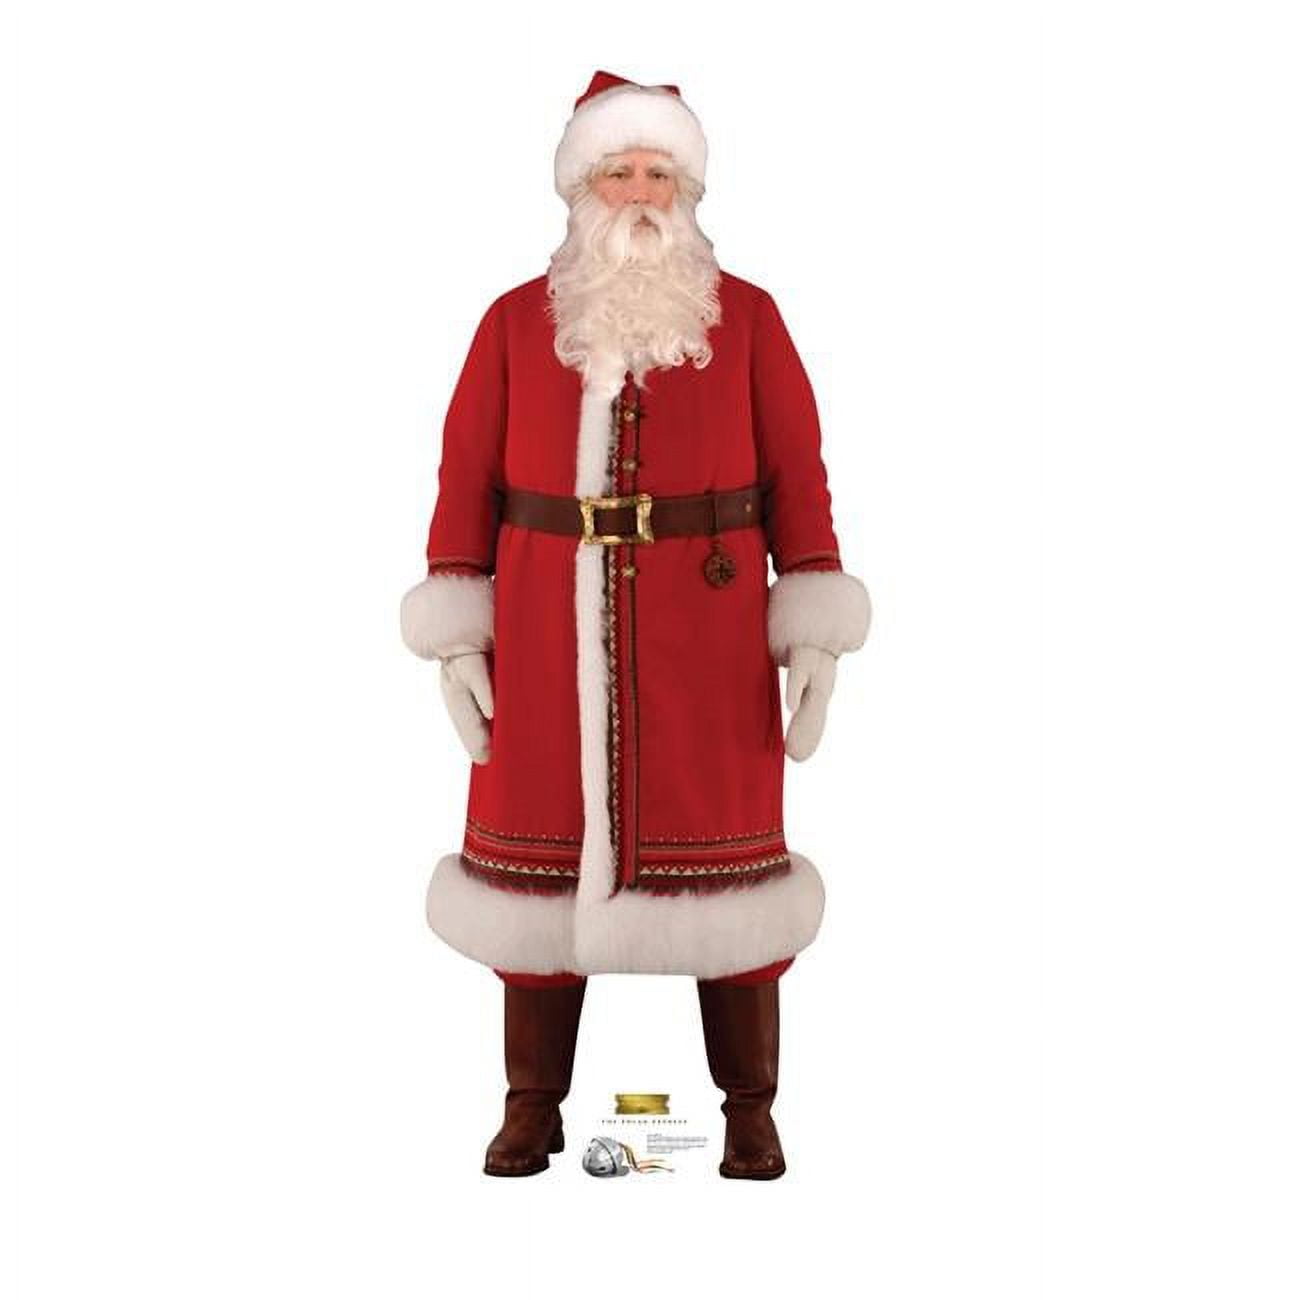 Picture of Advanced Graphics 2119 74 x 31 in. Santa - The Polar Express Cardboard Standup